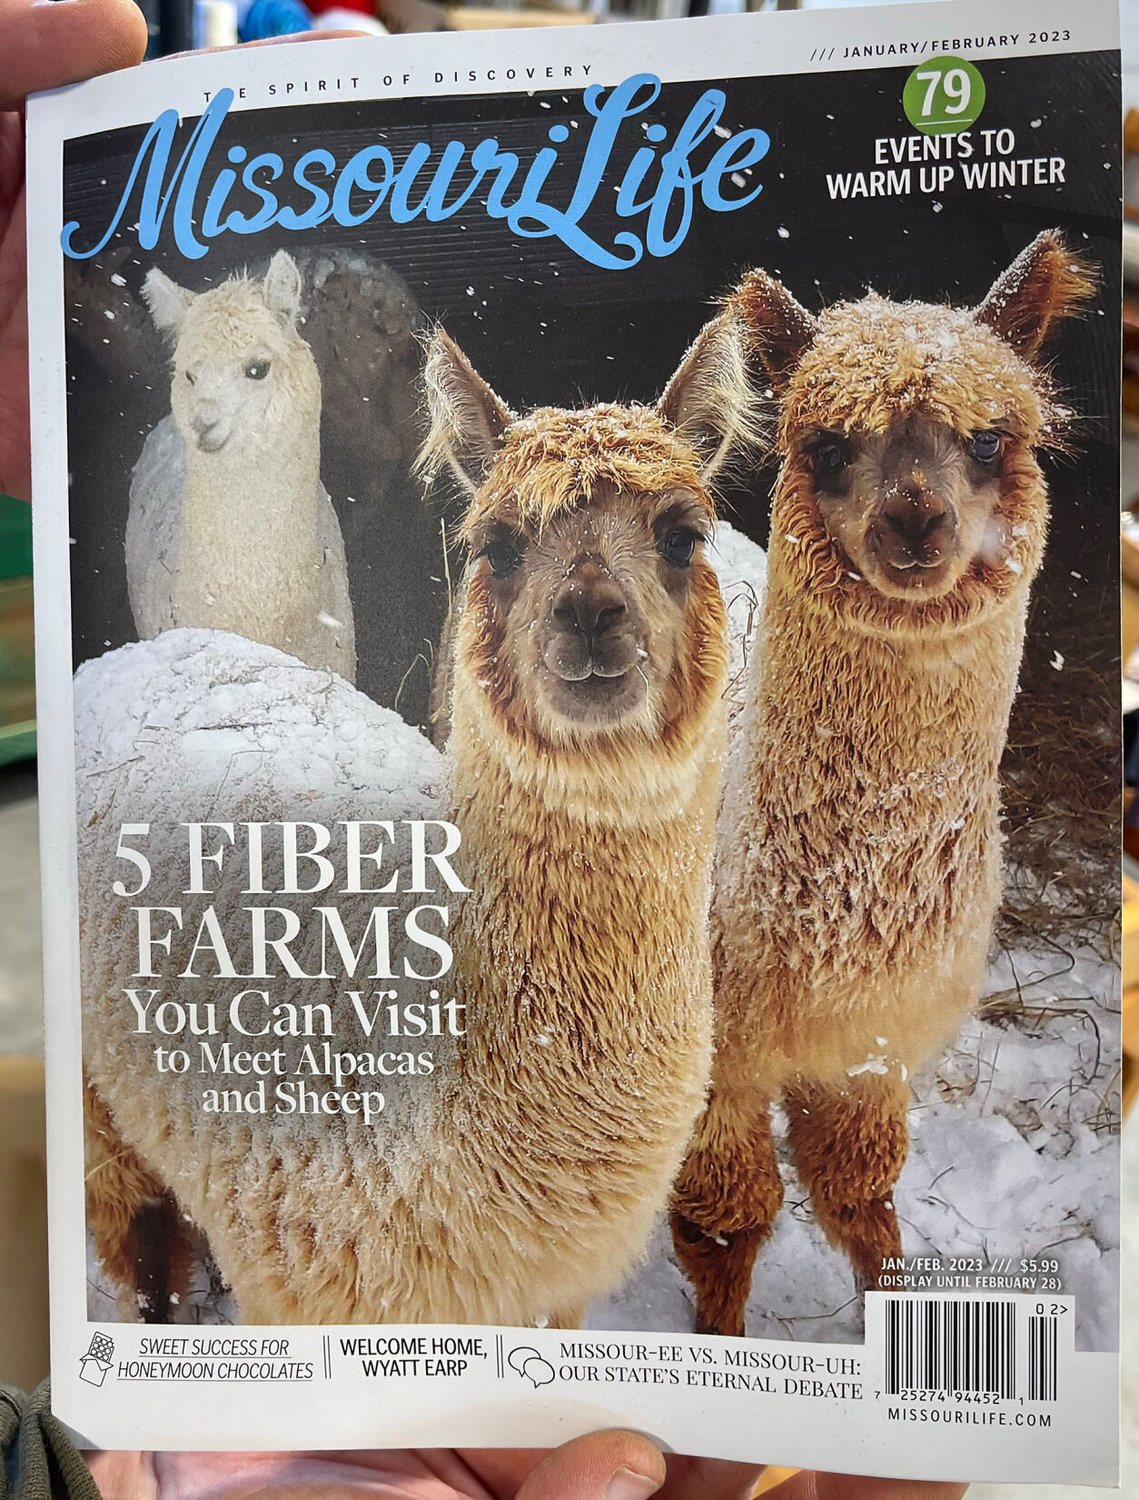 PHOTO GALLERY: Green Castle farmer featured in Missouri Life Magazine for  his exotic animals | Kirksville Daily Express